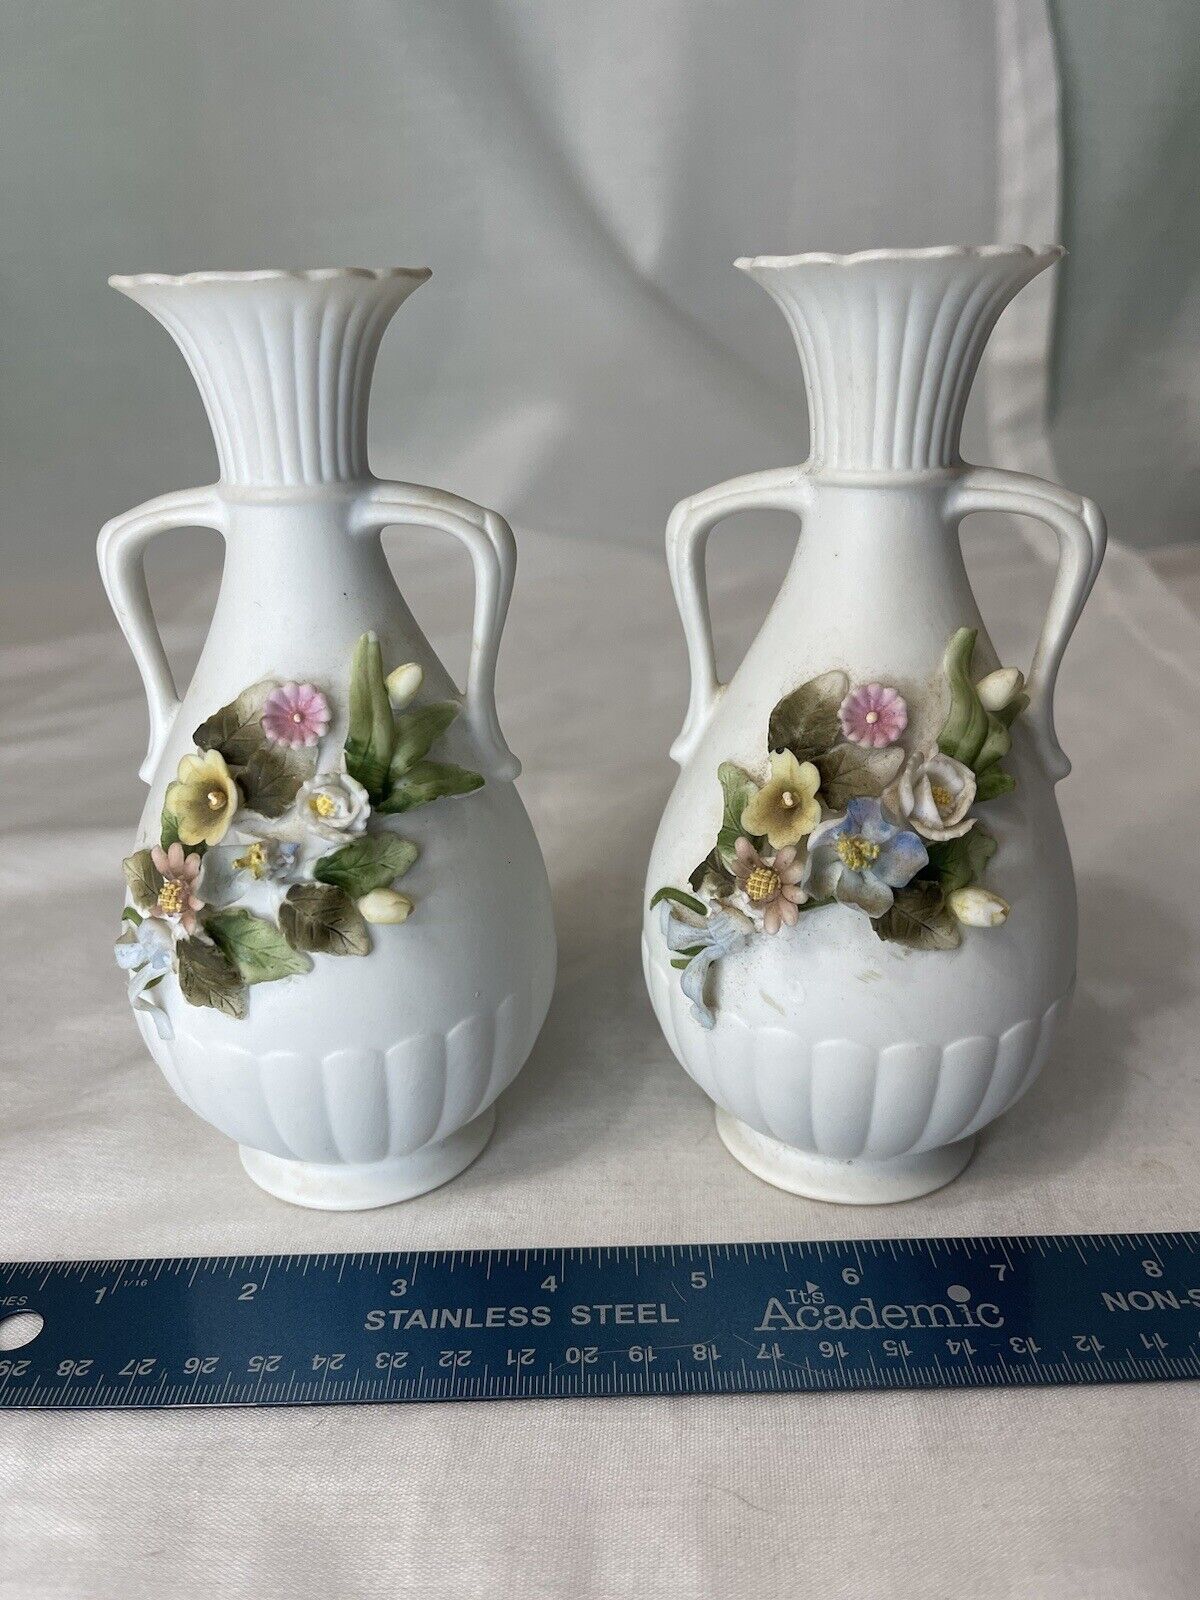 2 VTG Andrea Vases W/Flowers Bisque ware Chipped RARE 6728 Japan Hand Painted